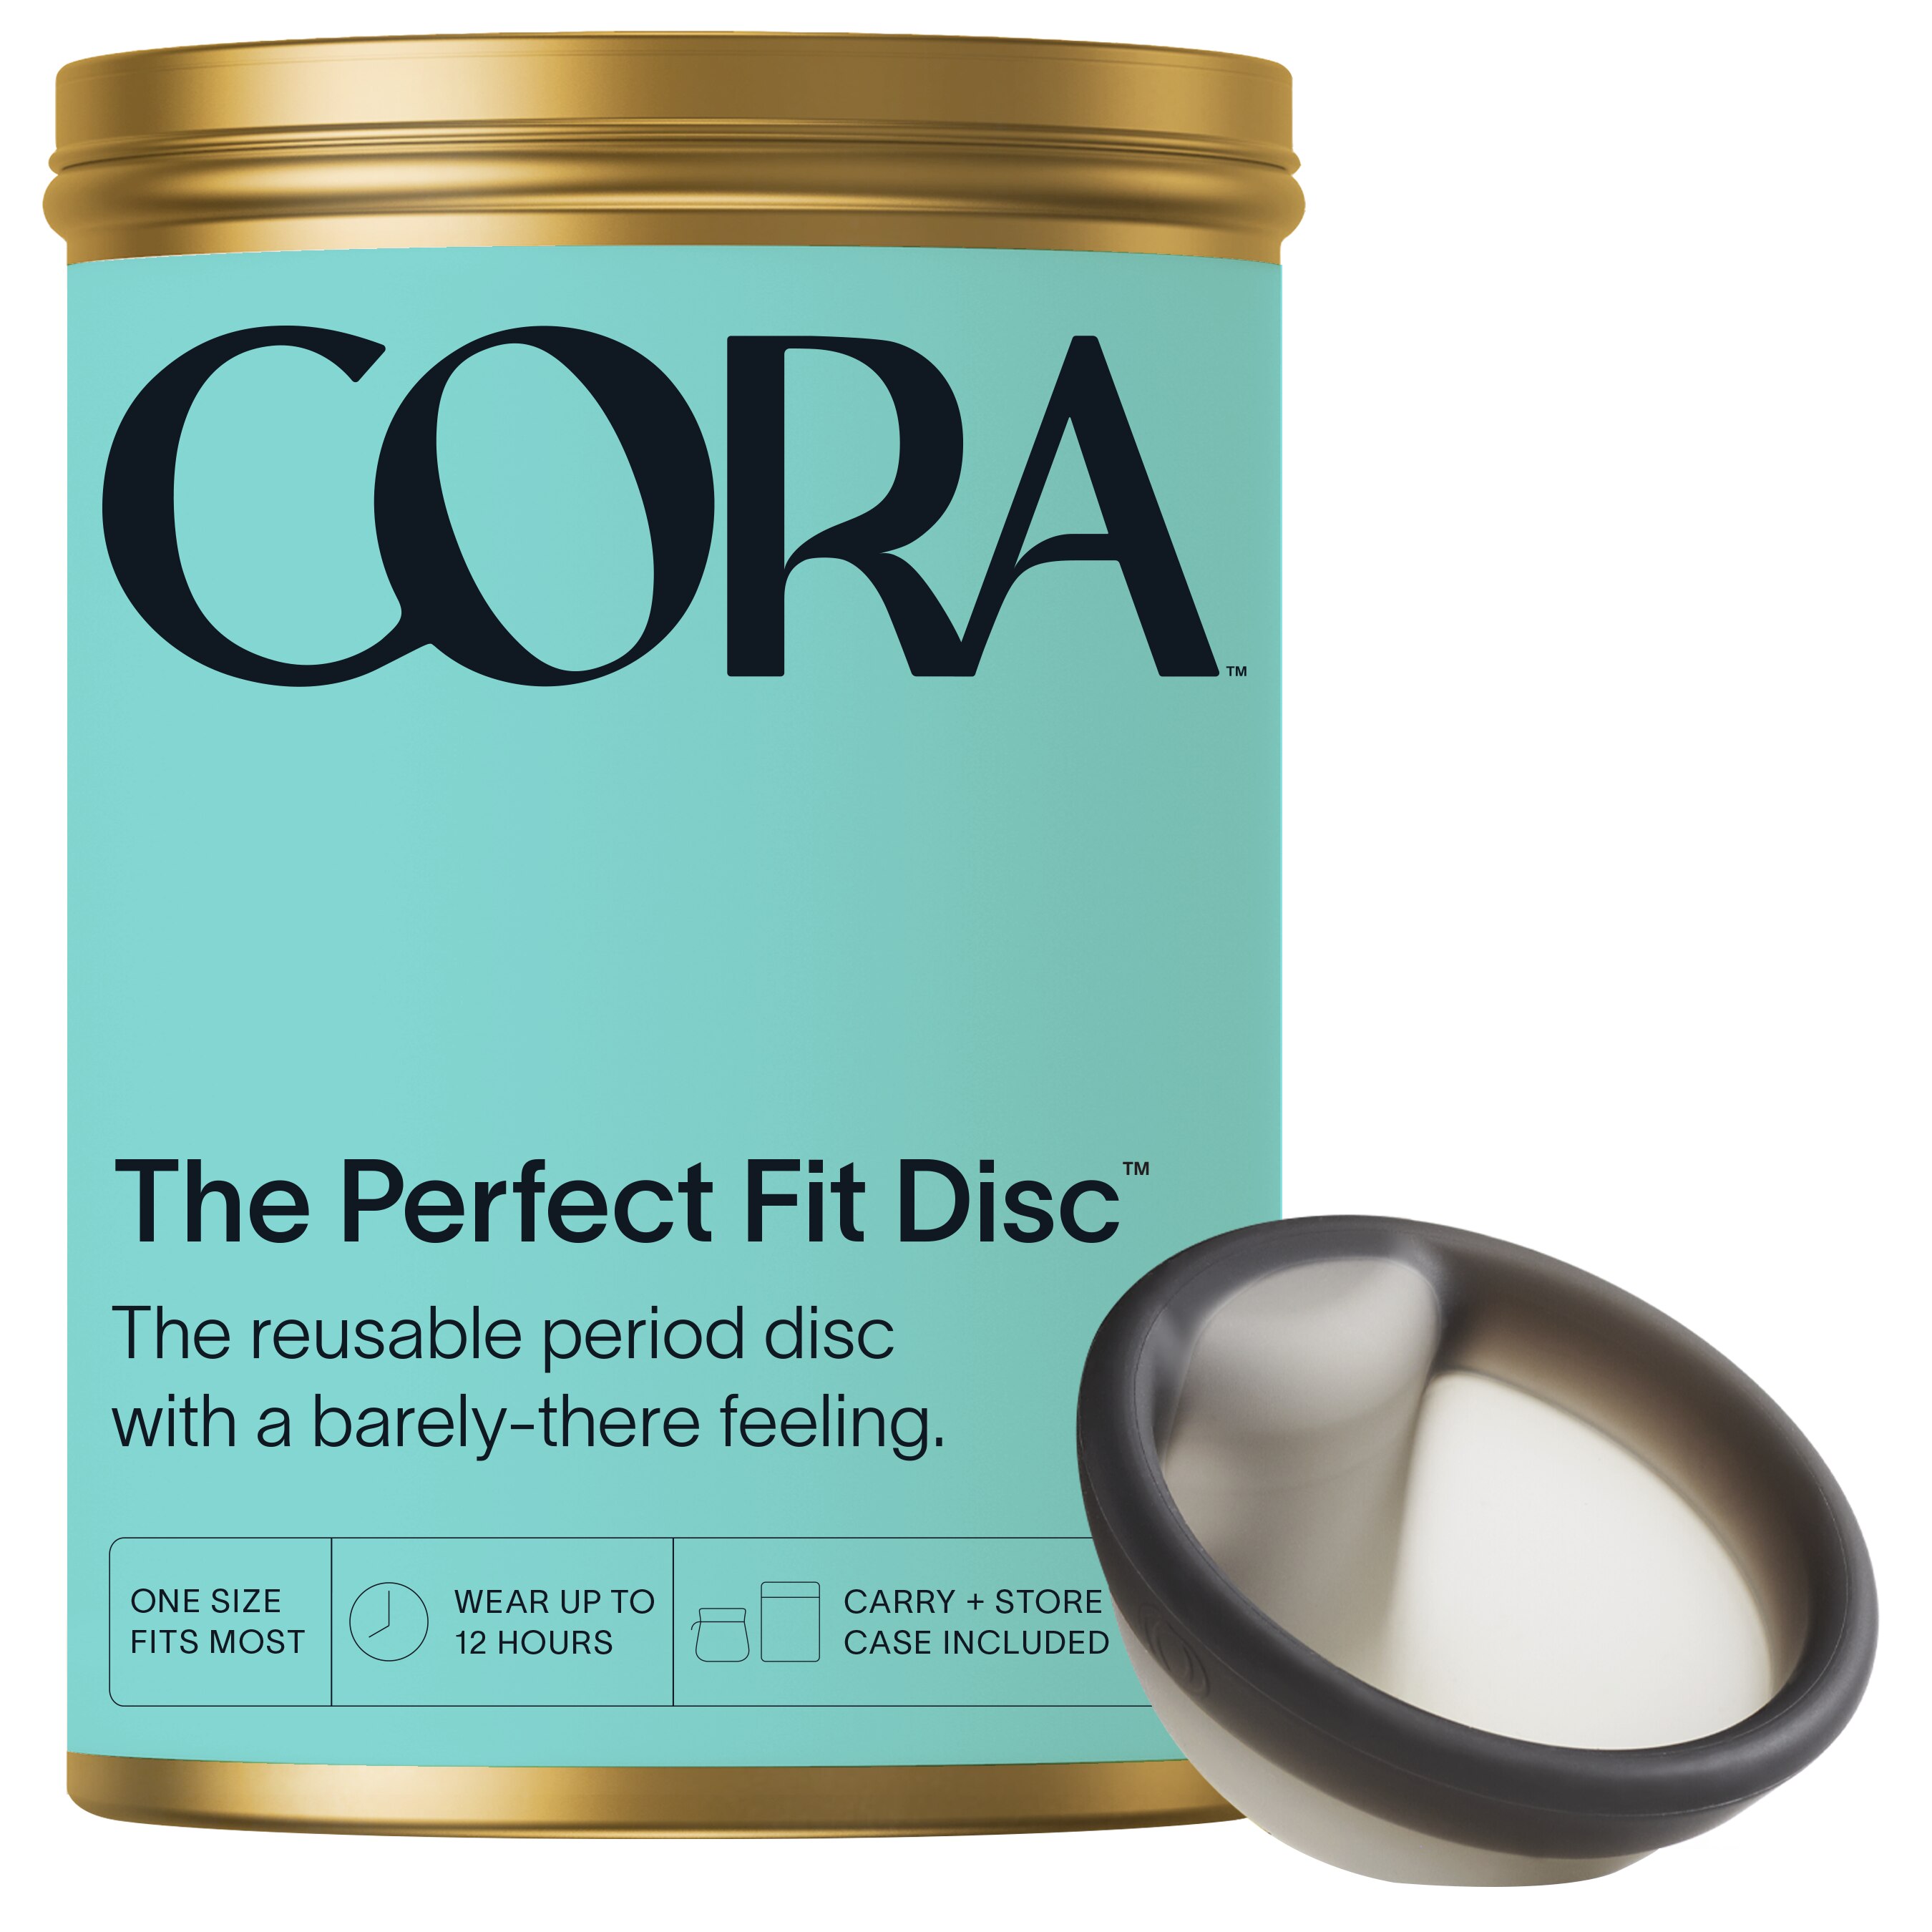 Cora The Perfect Fit Disc,...